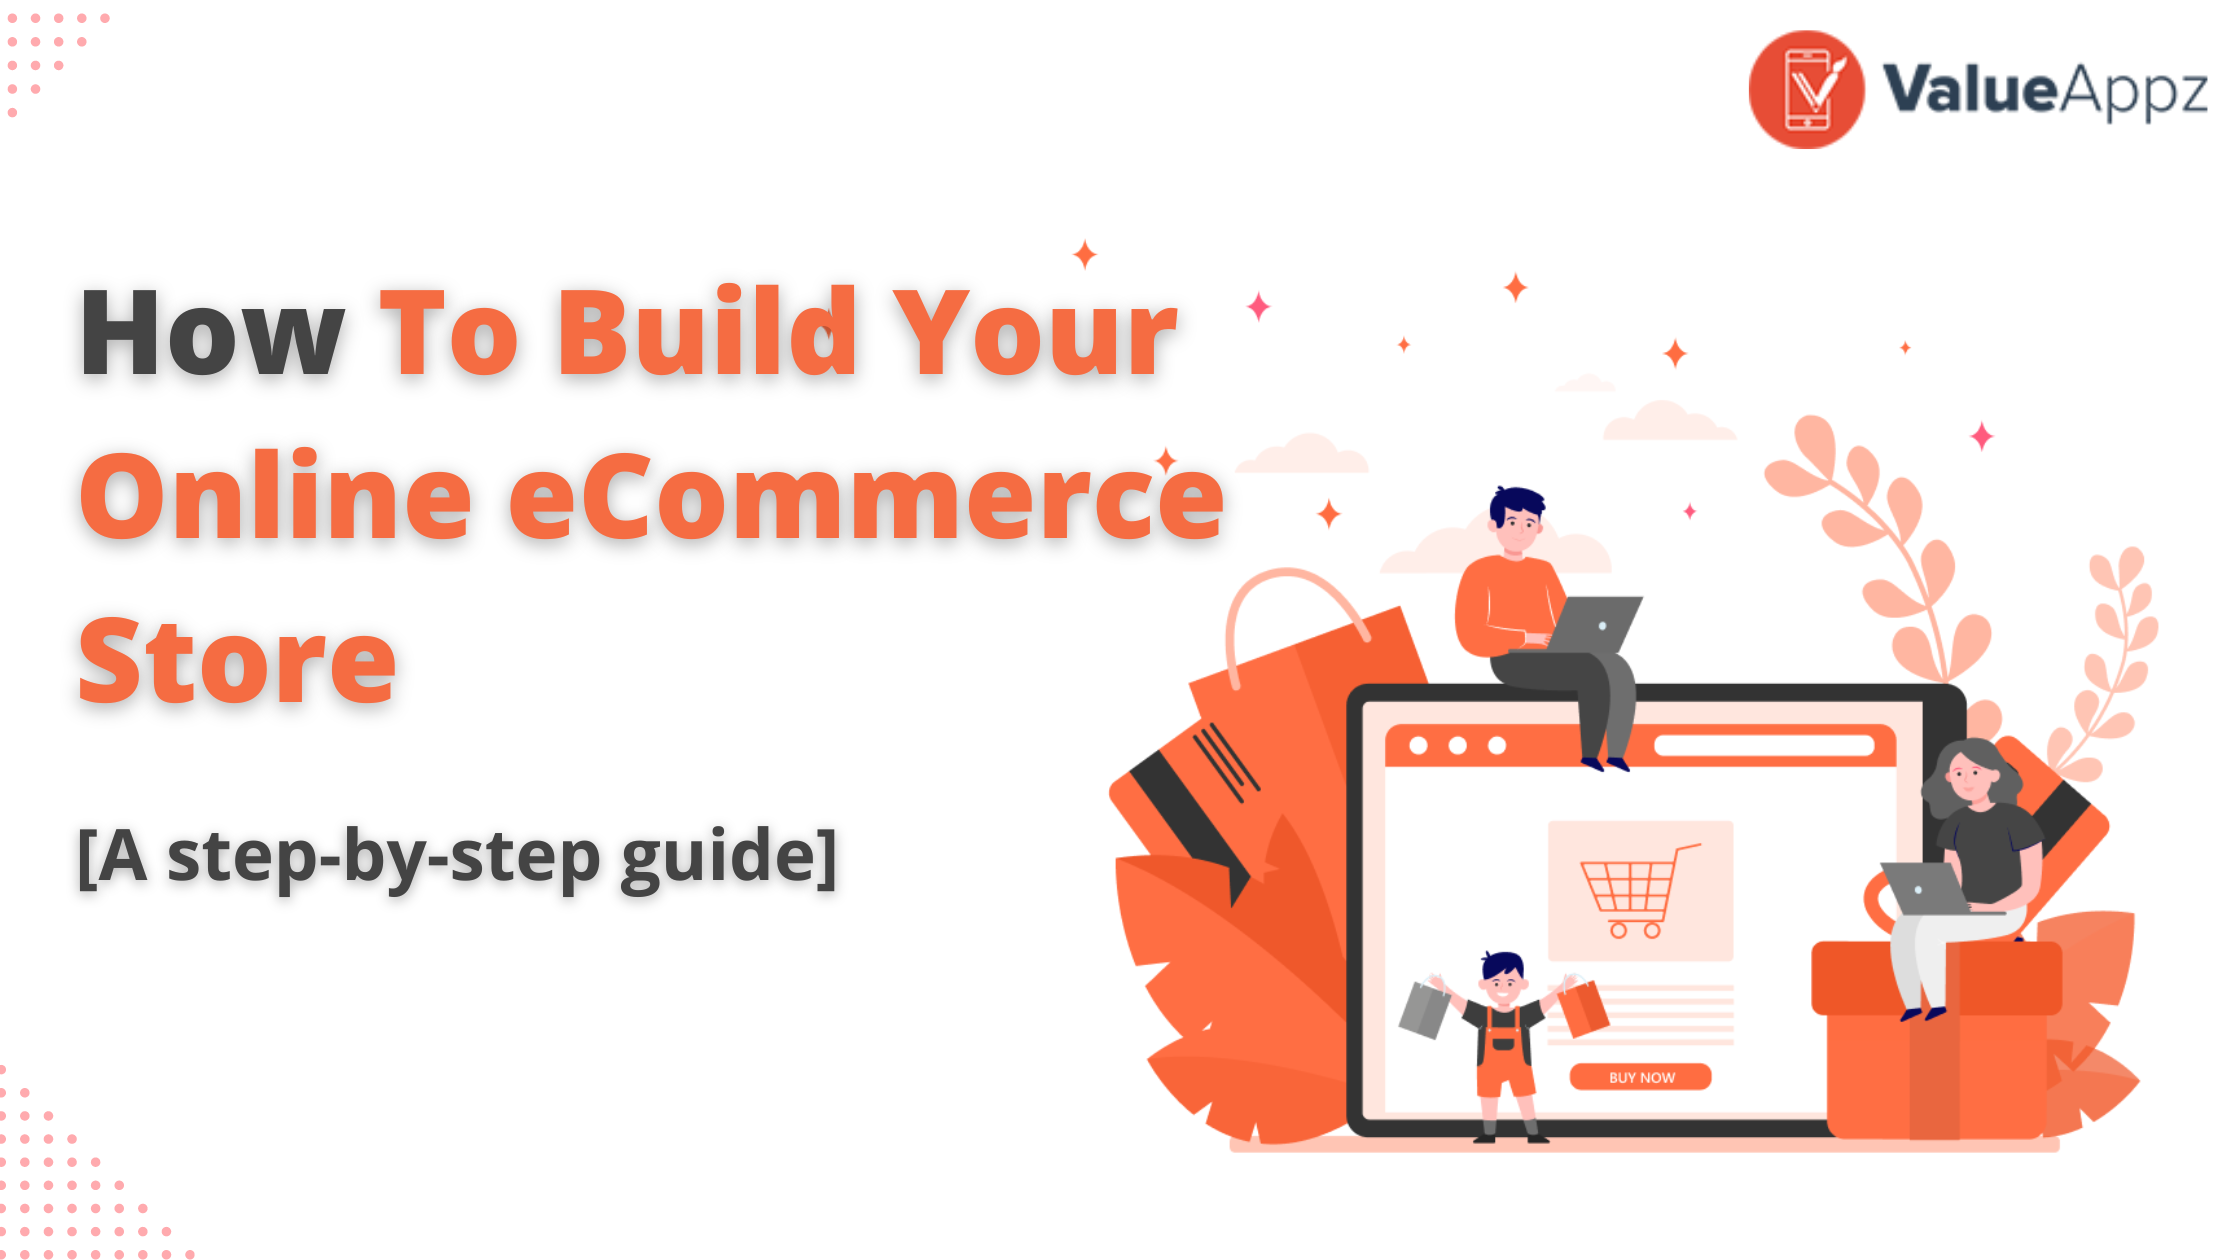 How To Build Your Online eCommerce Store: Step-by-Step Guide